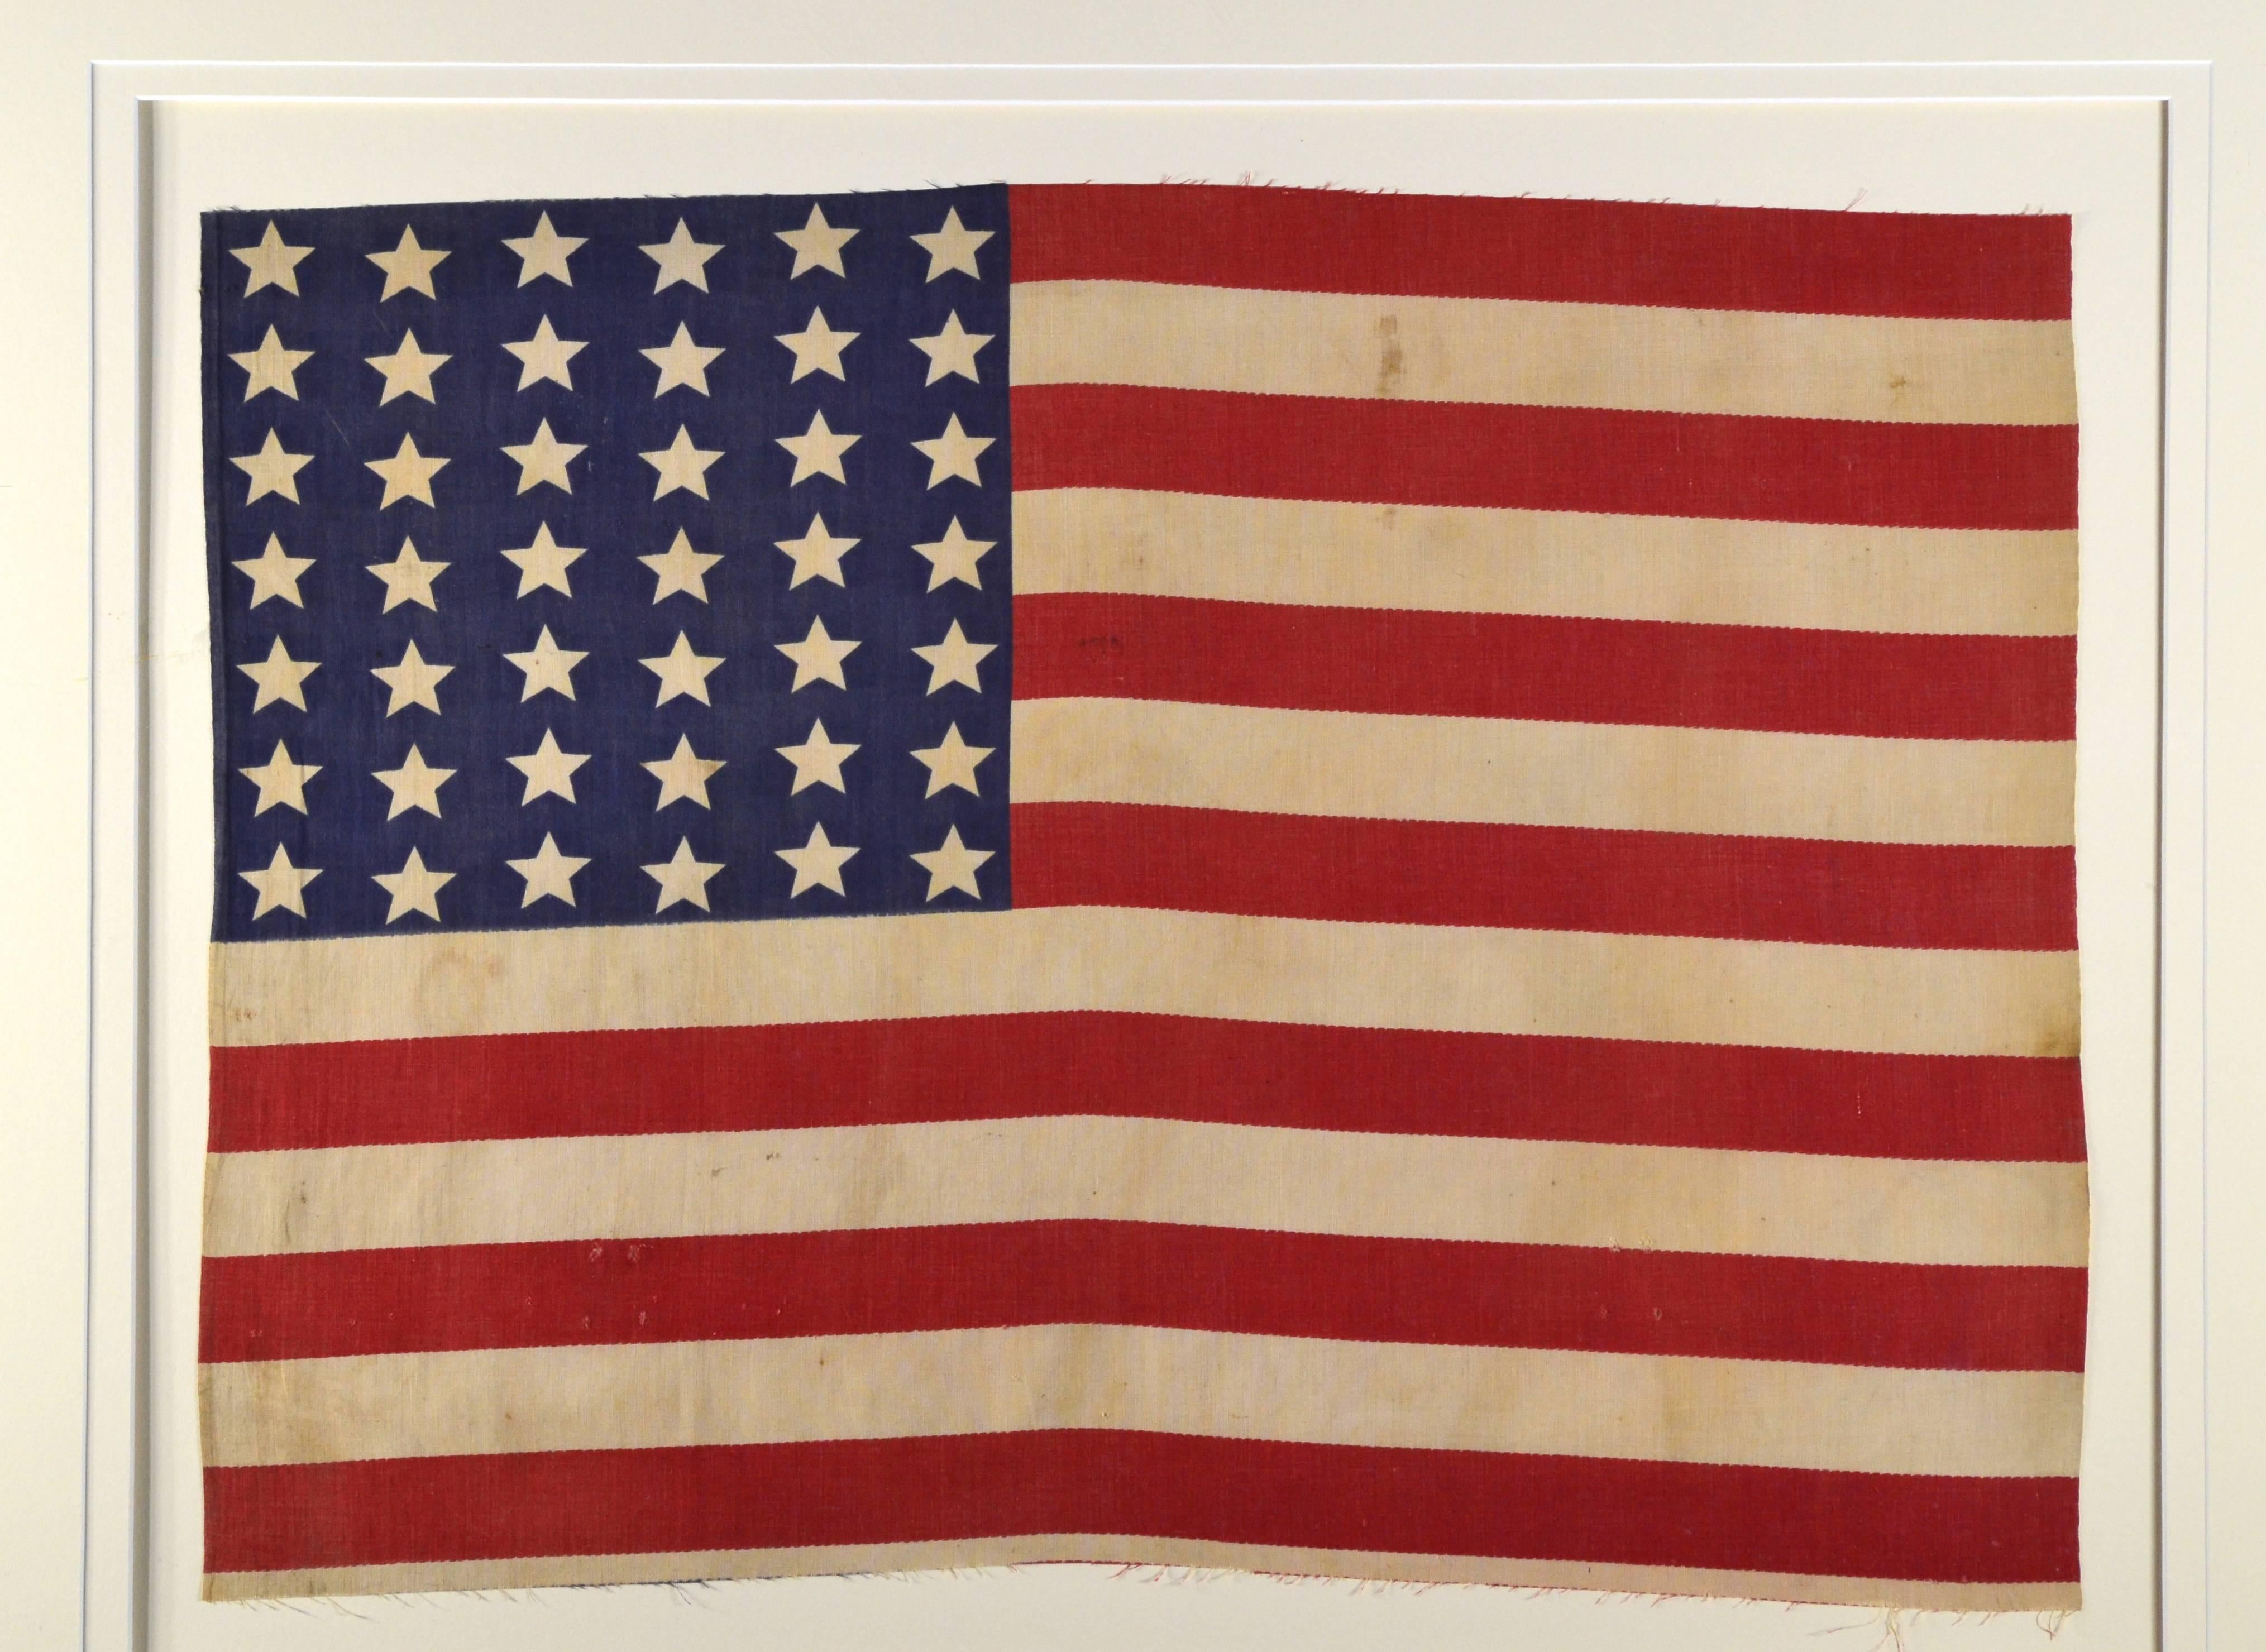 Antique 42 star American flag with conservation framing with UV acrylic. Made of cotton and would have been attached to a stick. The flag measures 18